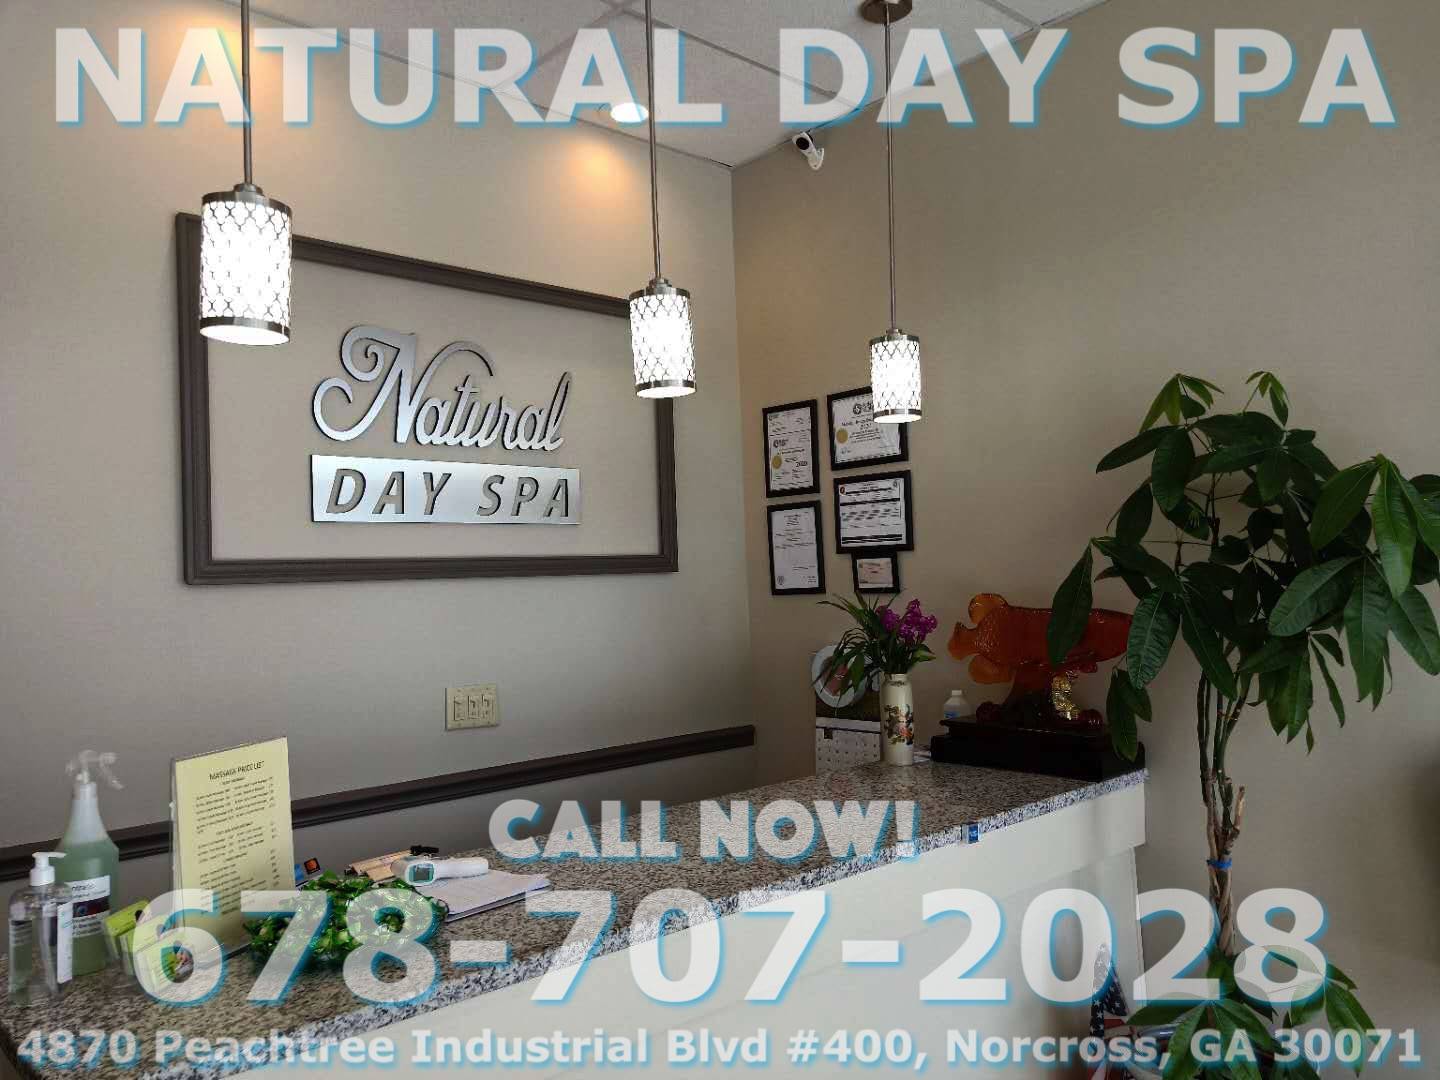 Natural Day Spa | 4870 Peachtree Industrial Blvd Suite 400, Norcross, GA 30071, United States | Phone: (678) 707-2028